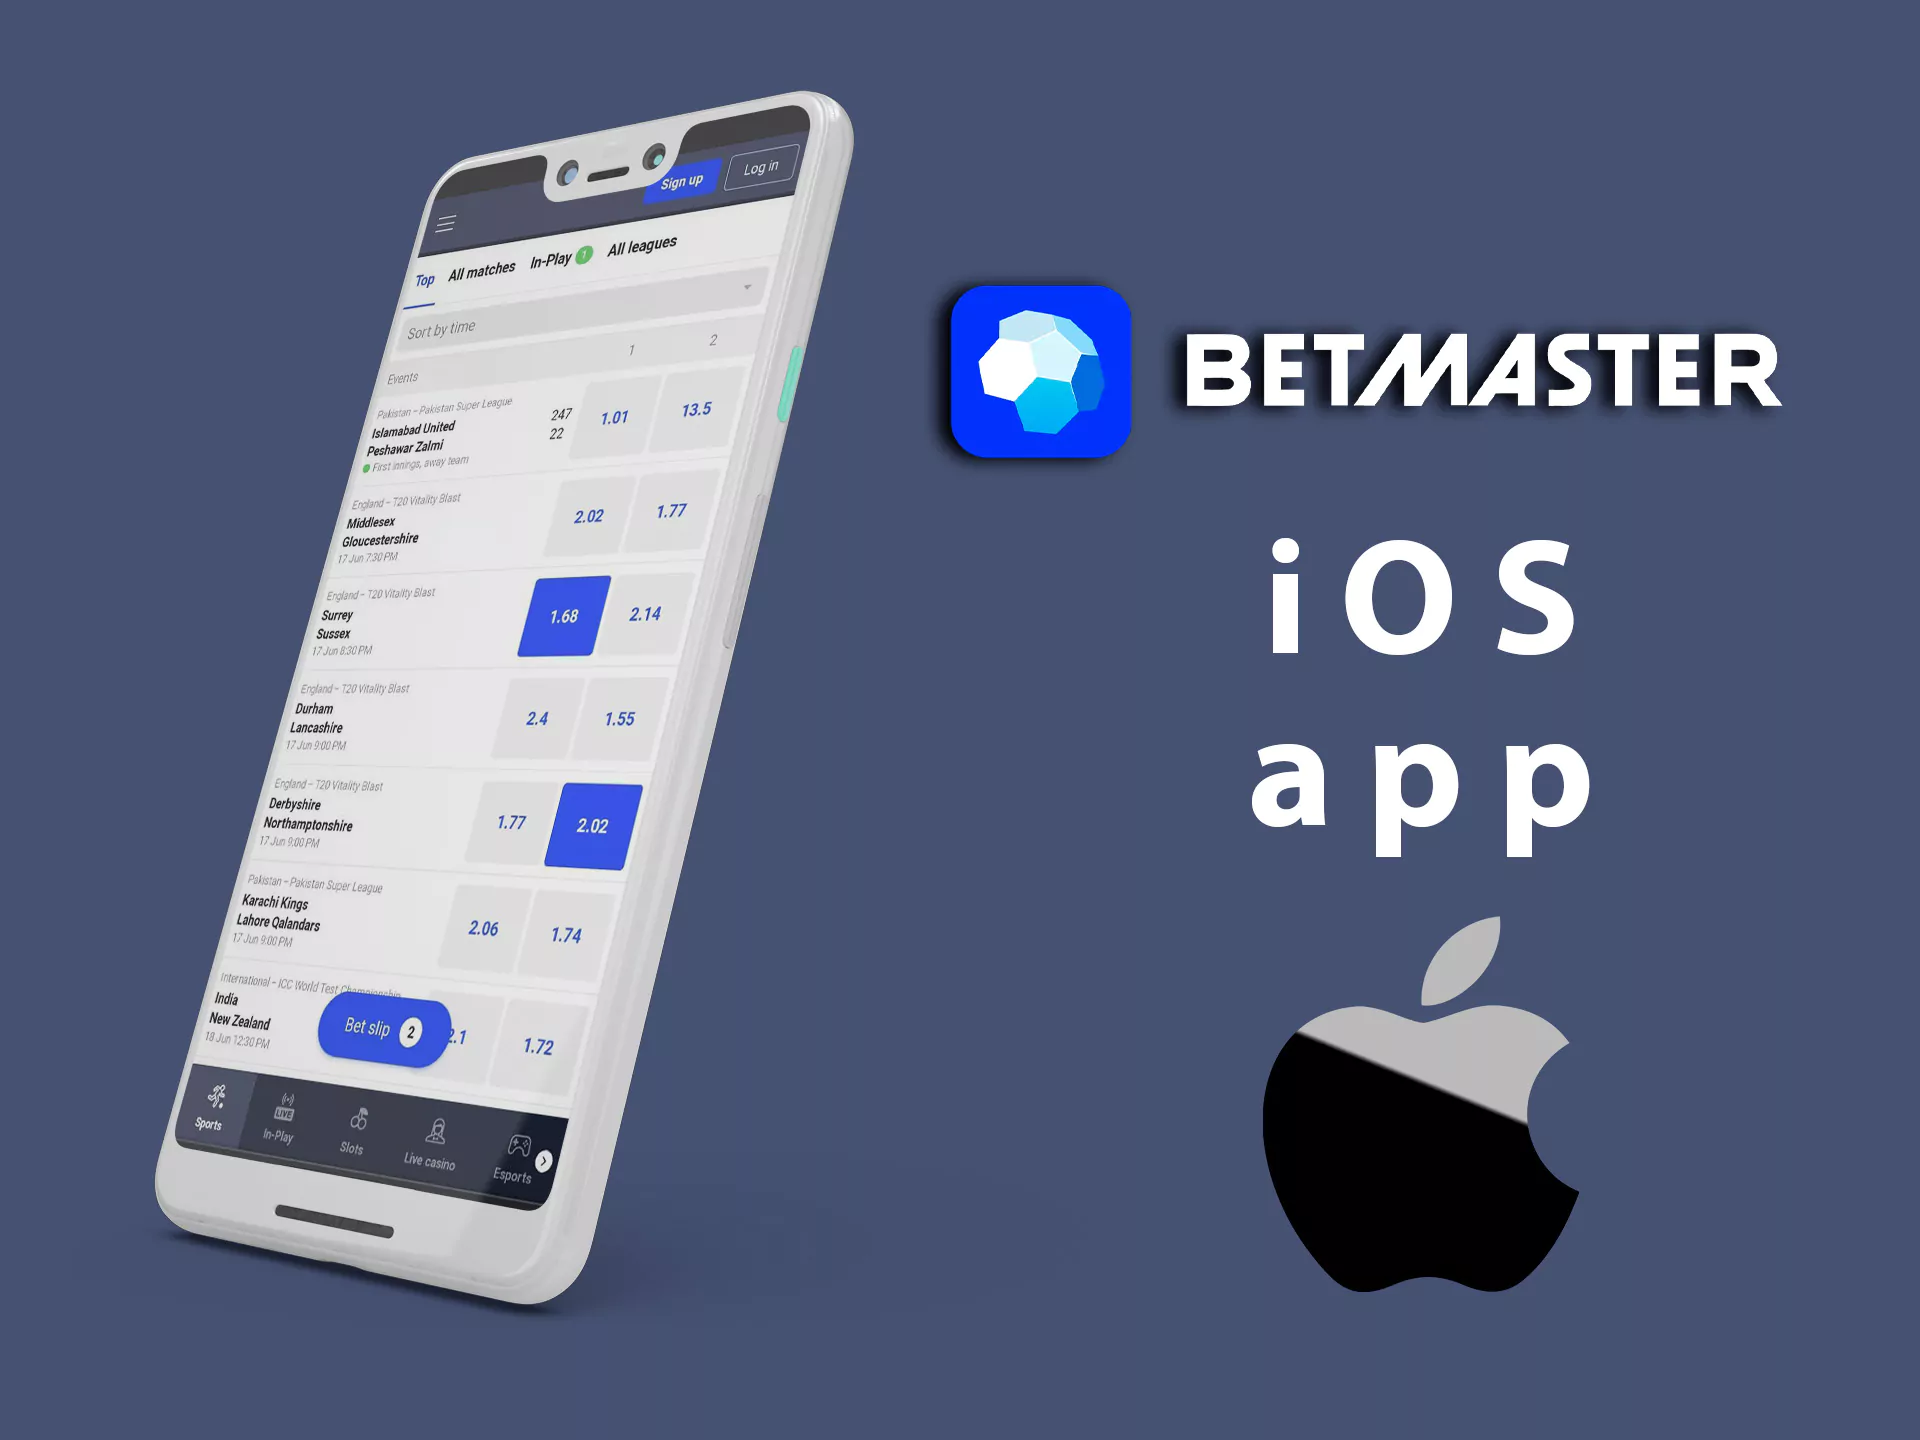 The Betmaster iOS app is a convenient way to bet on sports and casino games.